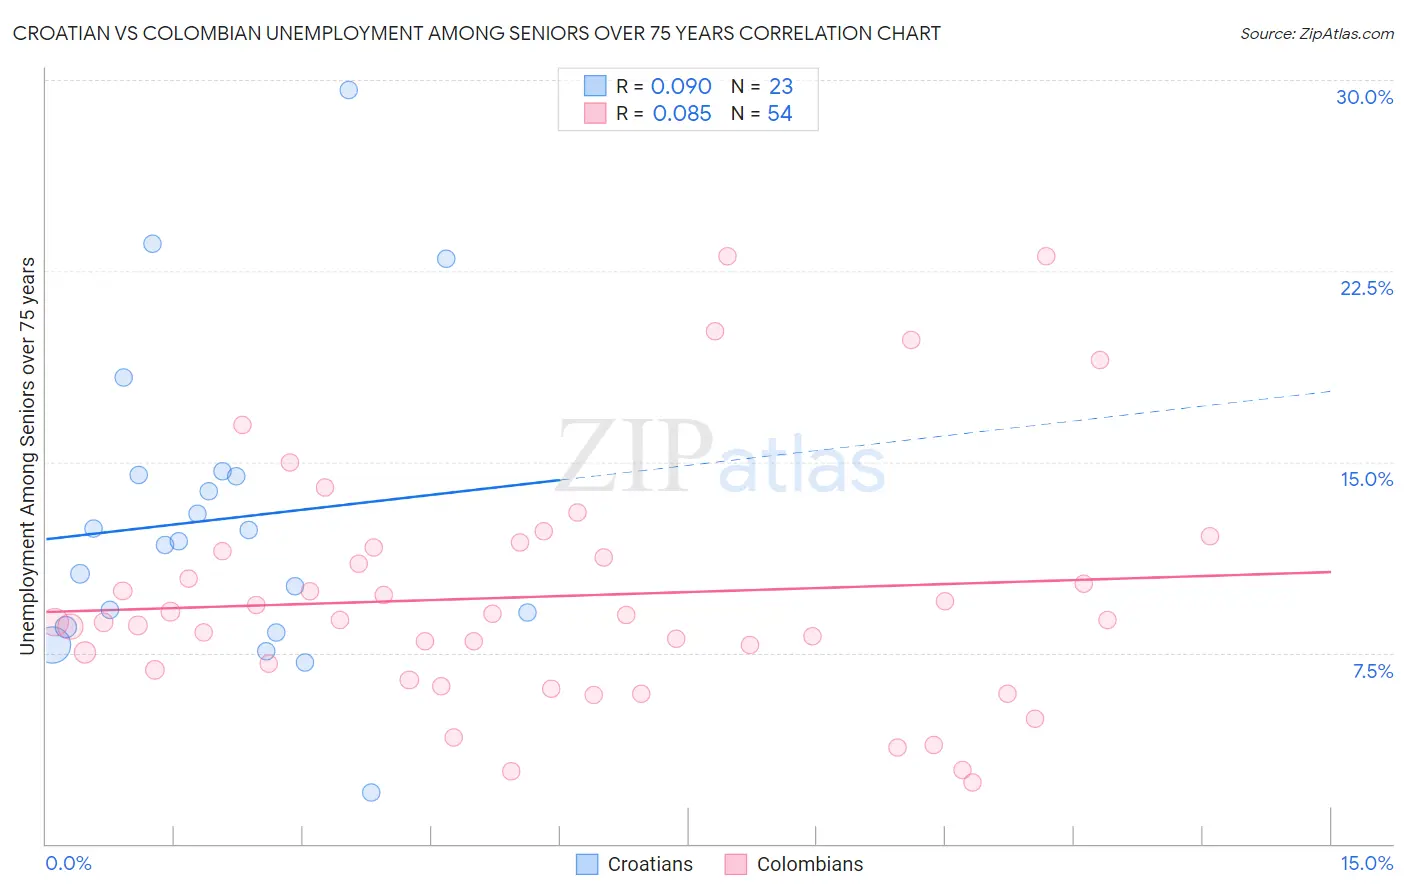 Croatian vs Colombian Unemployment Among Seniors over 75 years